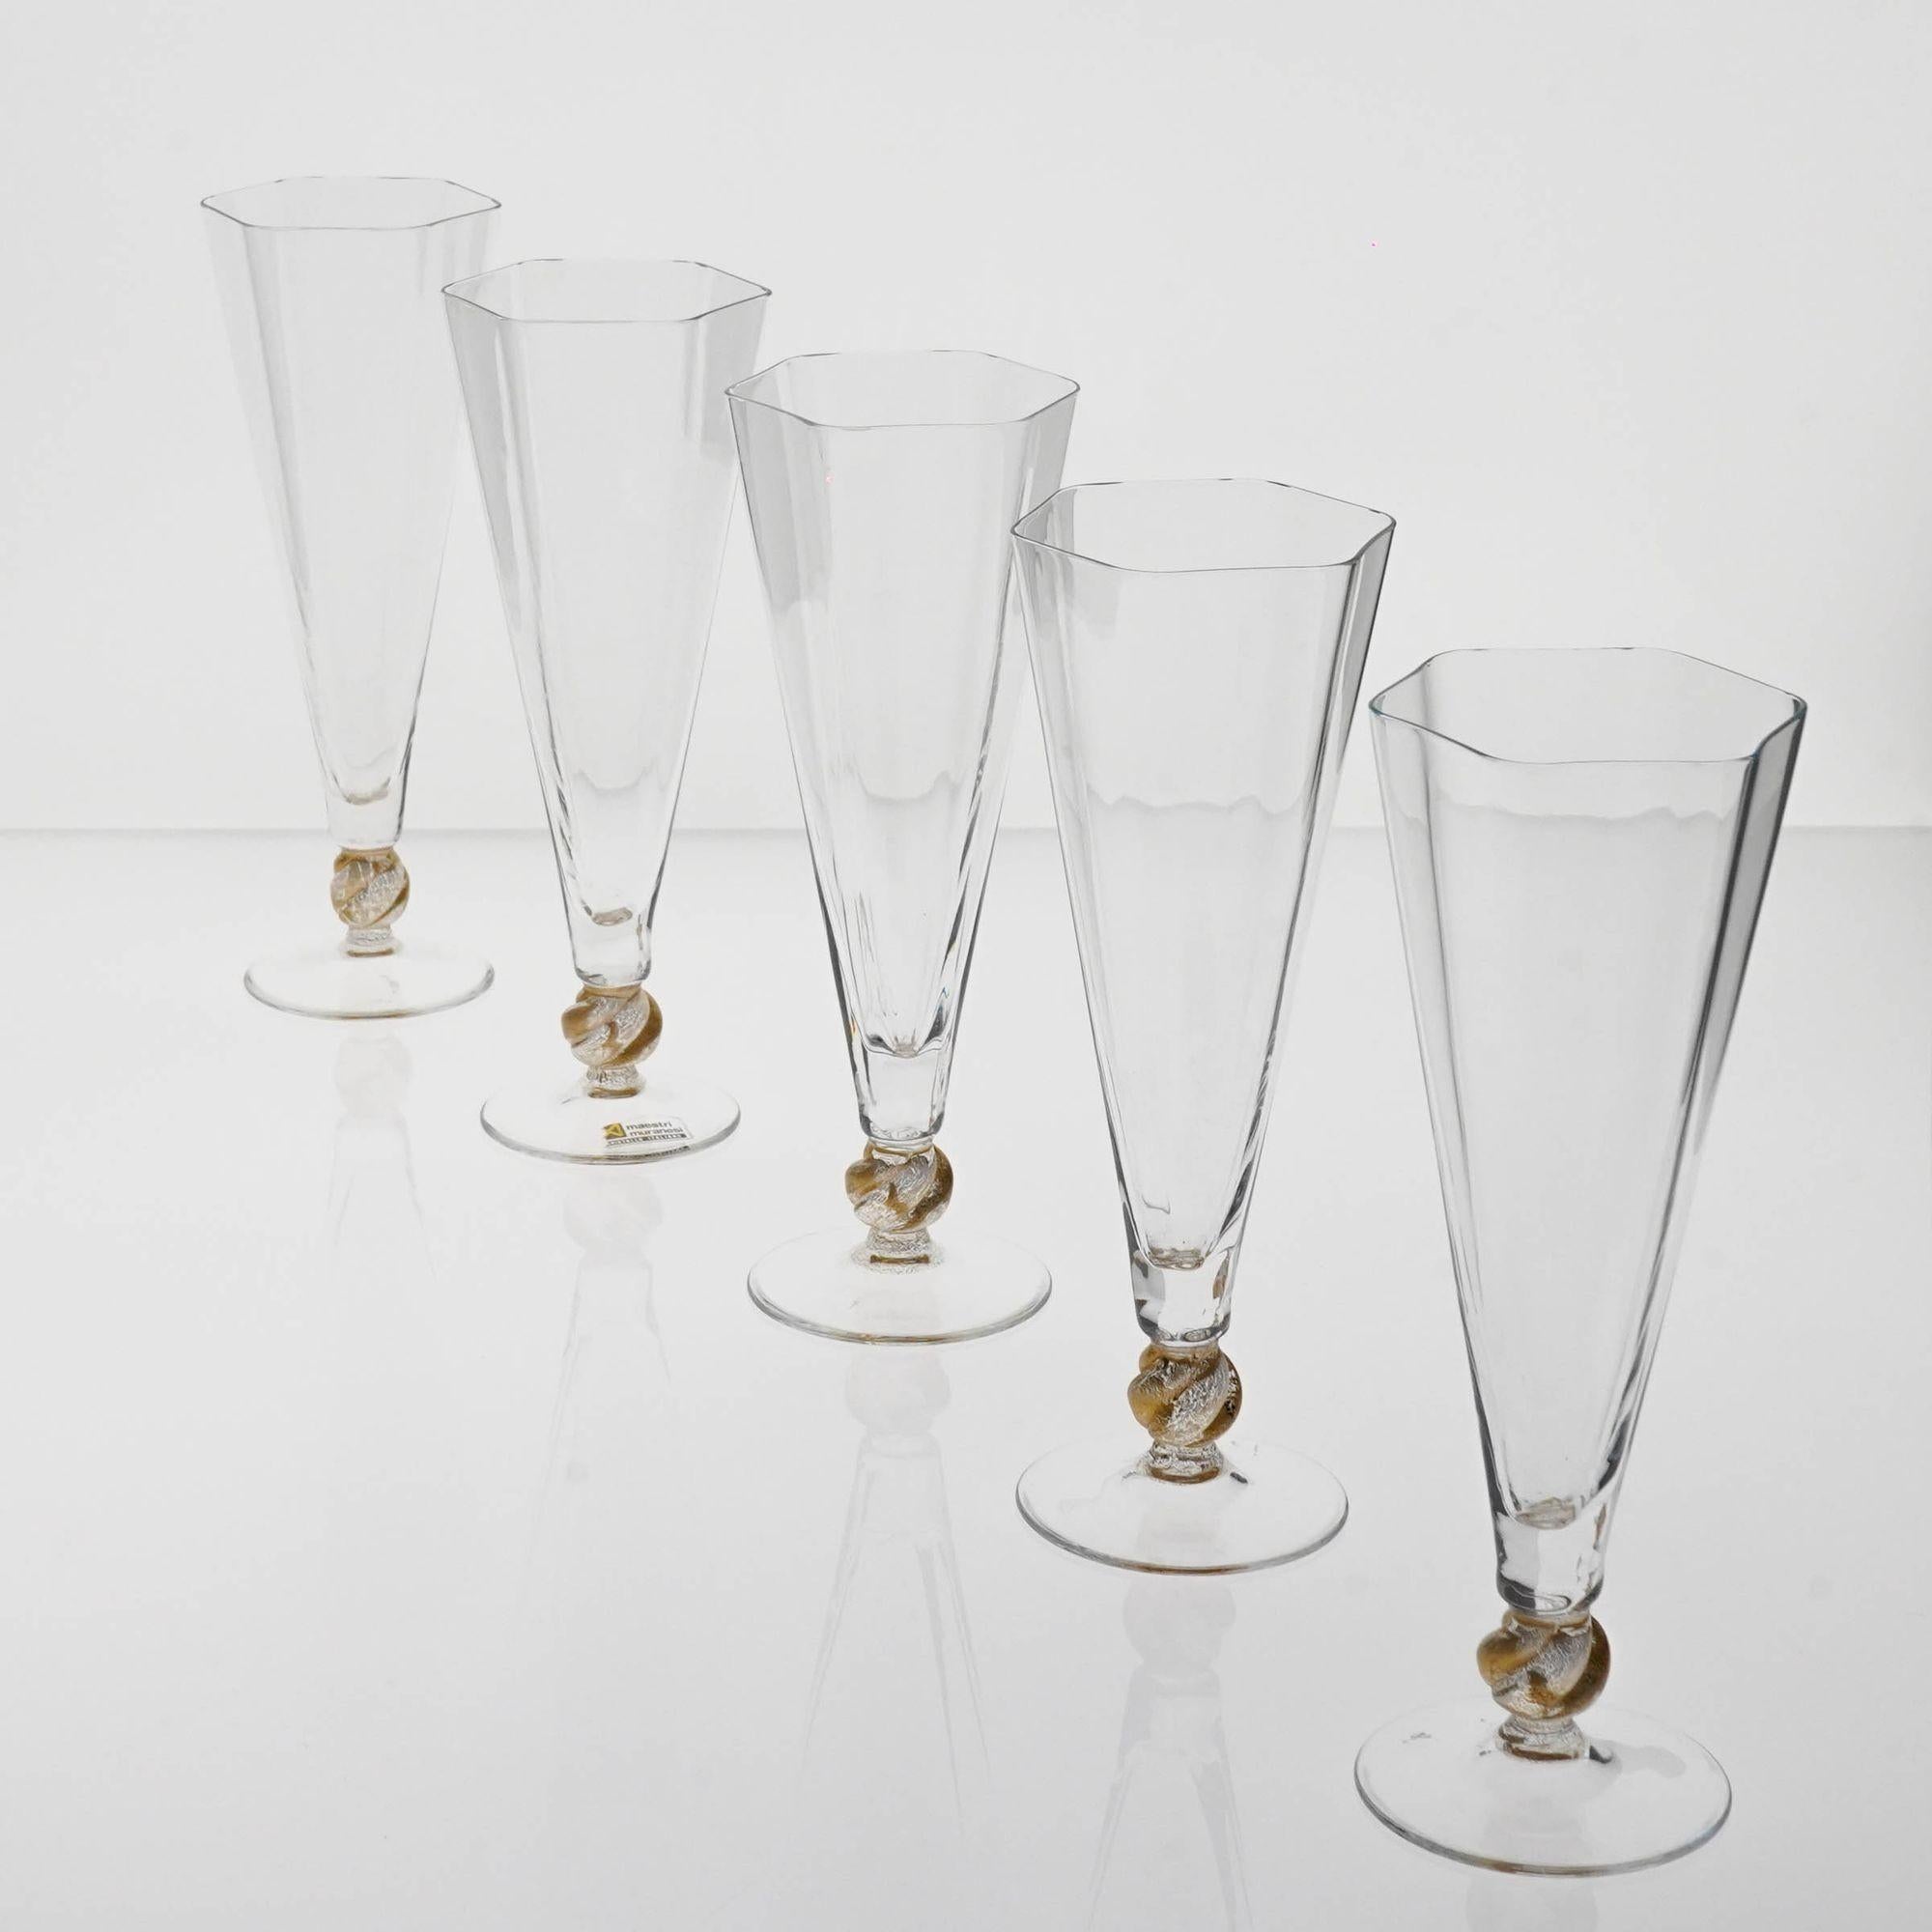 Cenedese Set of 5 flutes. Made by Maestri Muranesi, the company own by Amelio Cenedese working in the neverland of Murano.
It's the island of Serenella, made of the disposal of glass through the centuries. 
The flute is hexagonal, following the